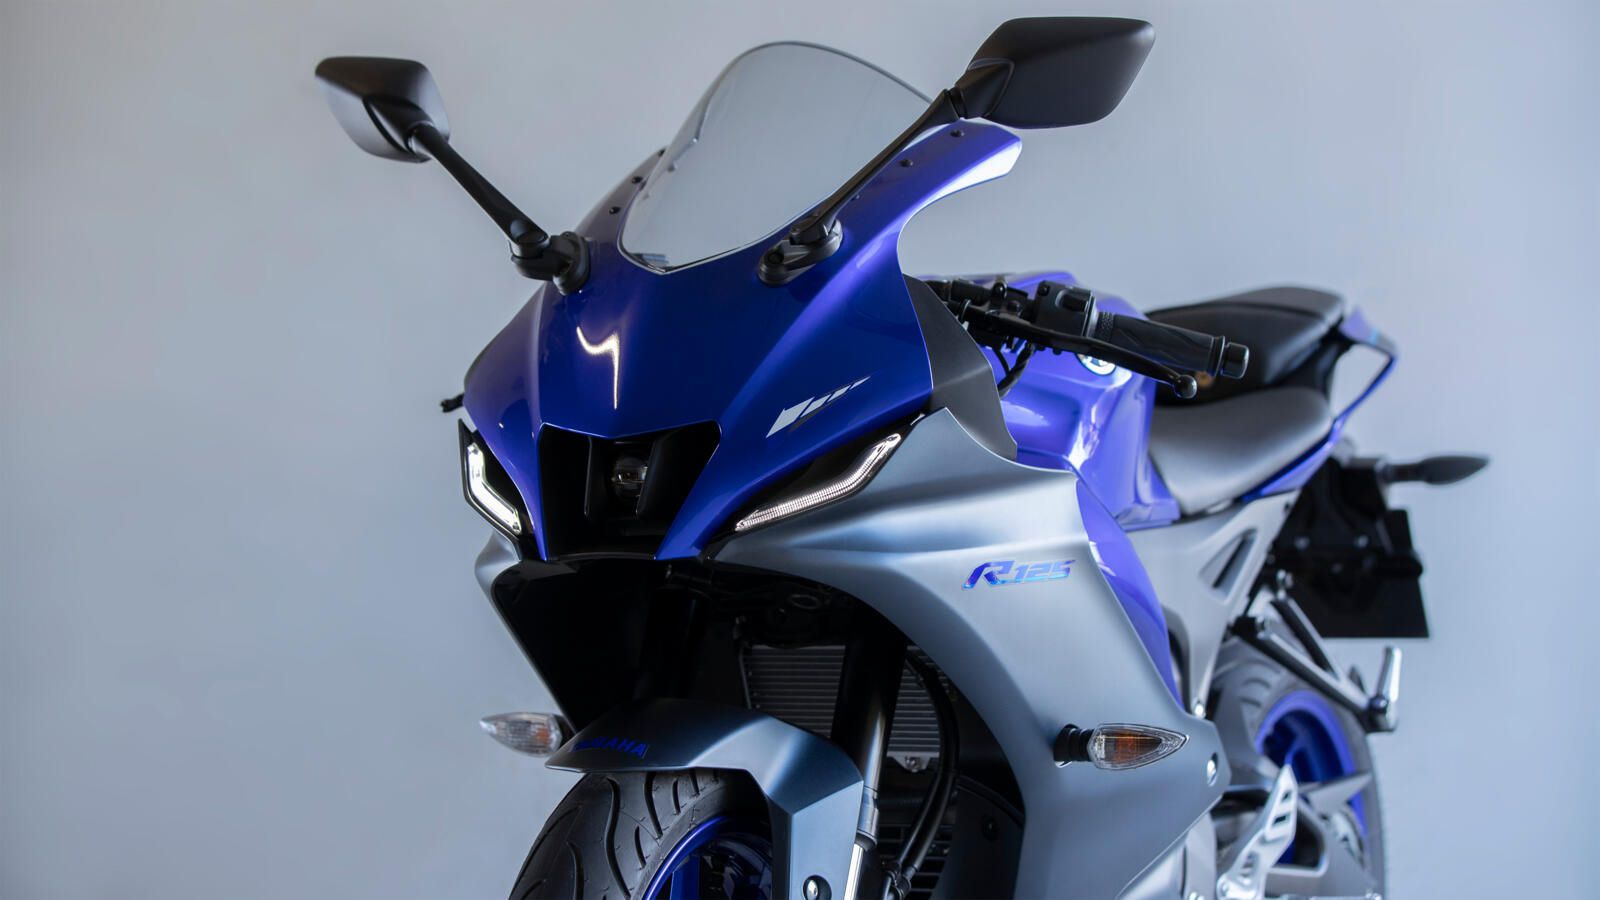 Redesigned front fascia and fairings are inspired by the sibling R7 model.